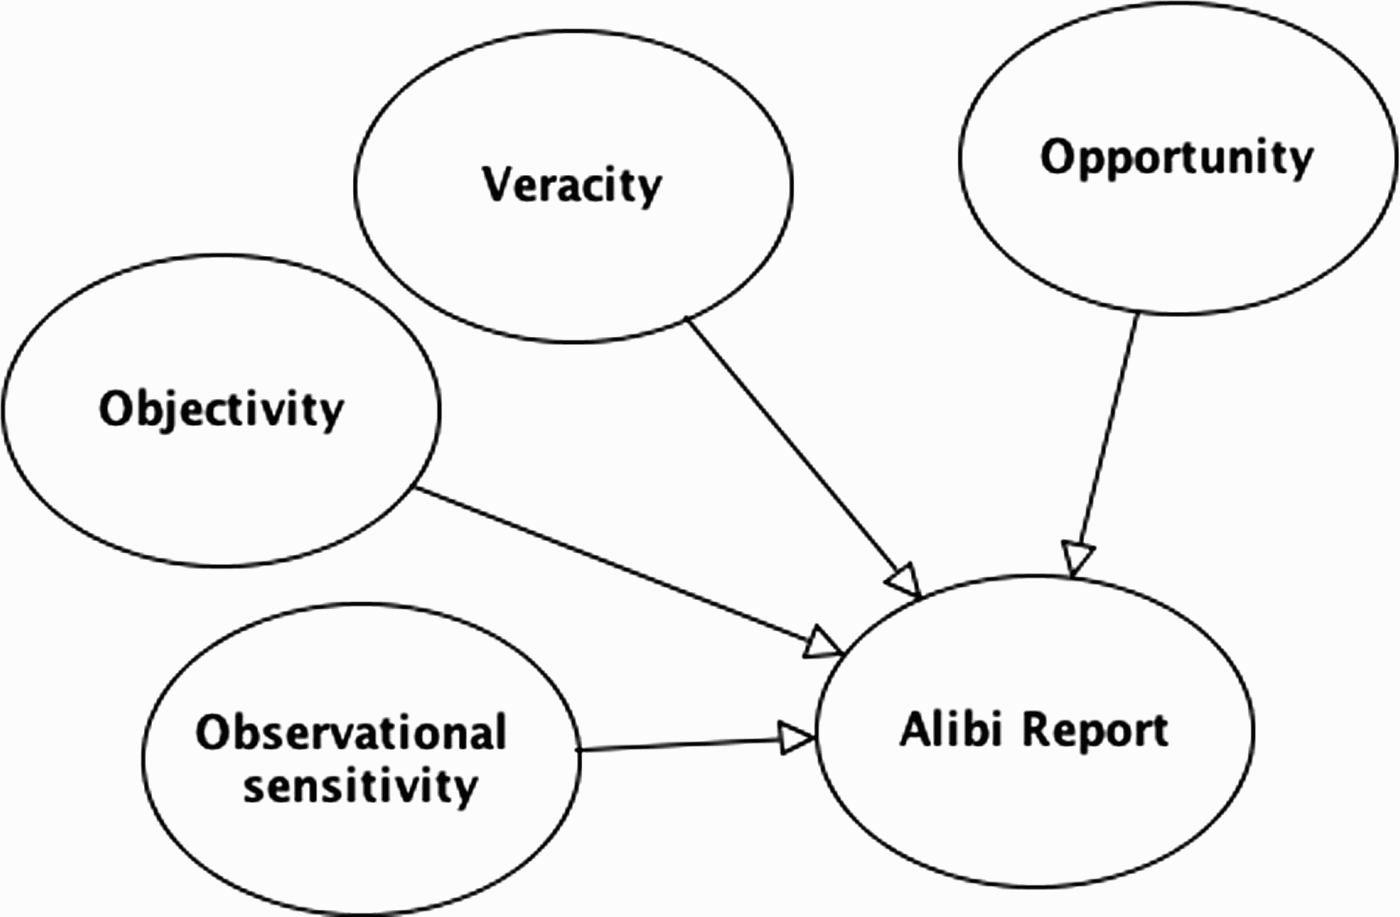 BN idiom for three components of reliability: observational sensitivity, objectivity and veracity. Note in this model the evidence report concerns the question of opportunity.